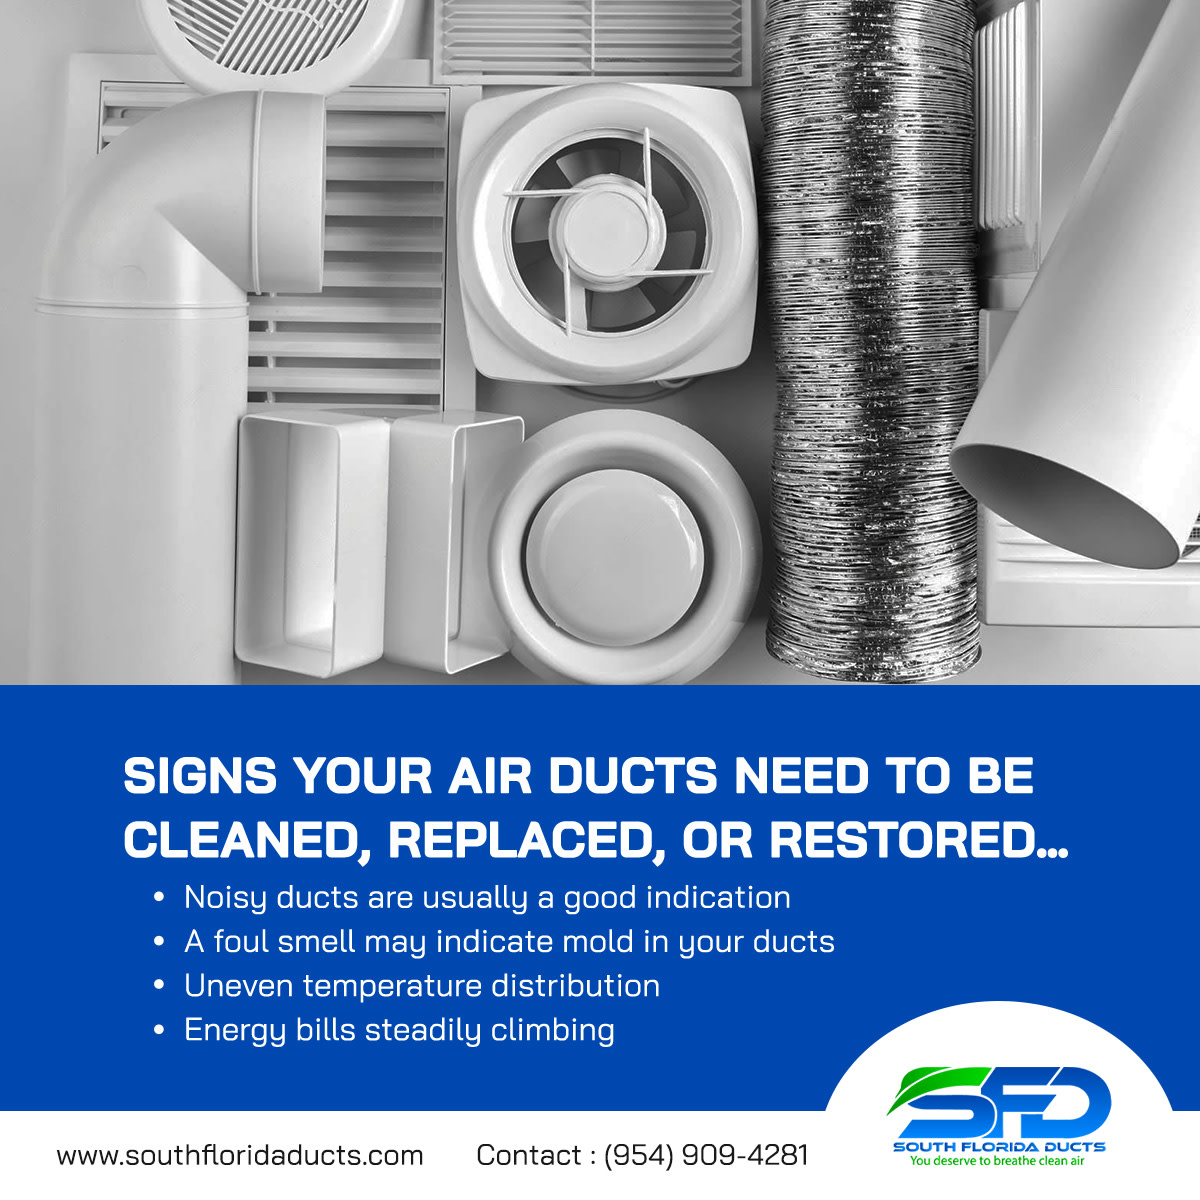 South Florida Ducts. - Signs Your Air Ducts Need to Be Cleaned, Replaced, or Restored…
LEARN MORE... southfloridaducts.com/signs-your-air…

#airducts #airductcleaning #airductinstallation #airductrestoration #hvac  #dryerventcleaning #fortlauderdale #ftlauderdale